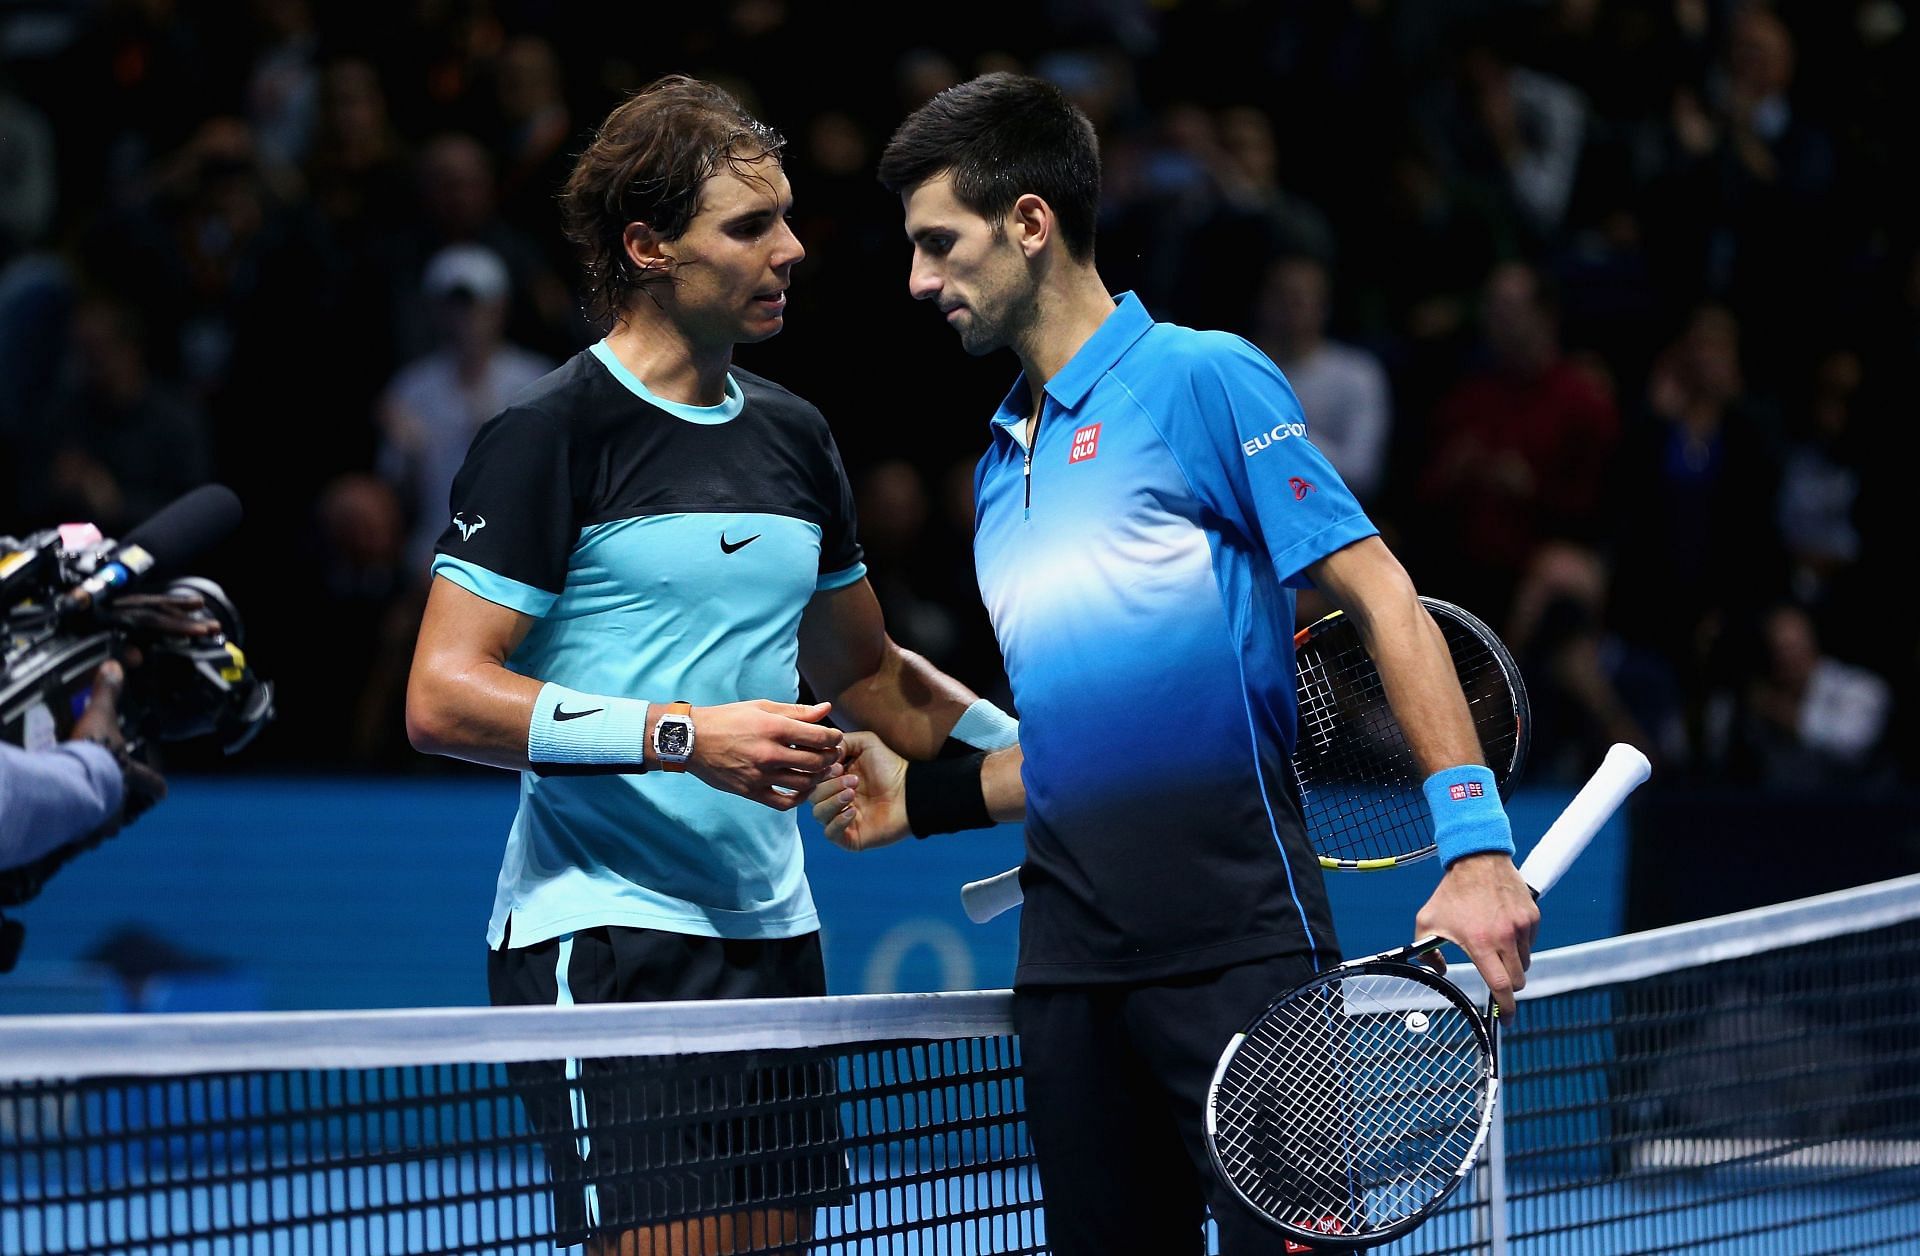 The only two men with 22 Grand Slam titles